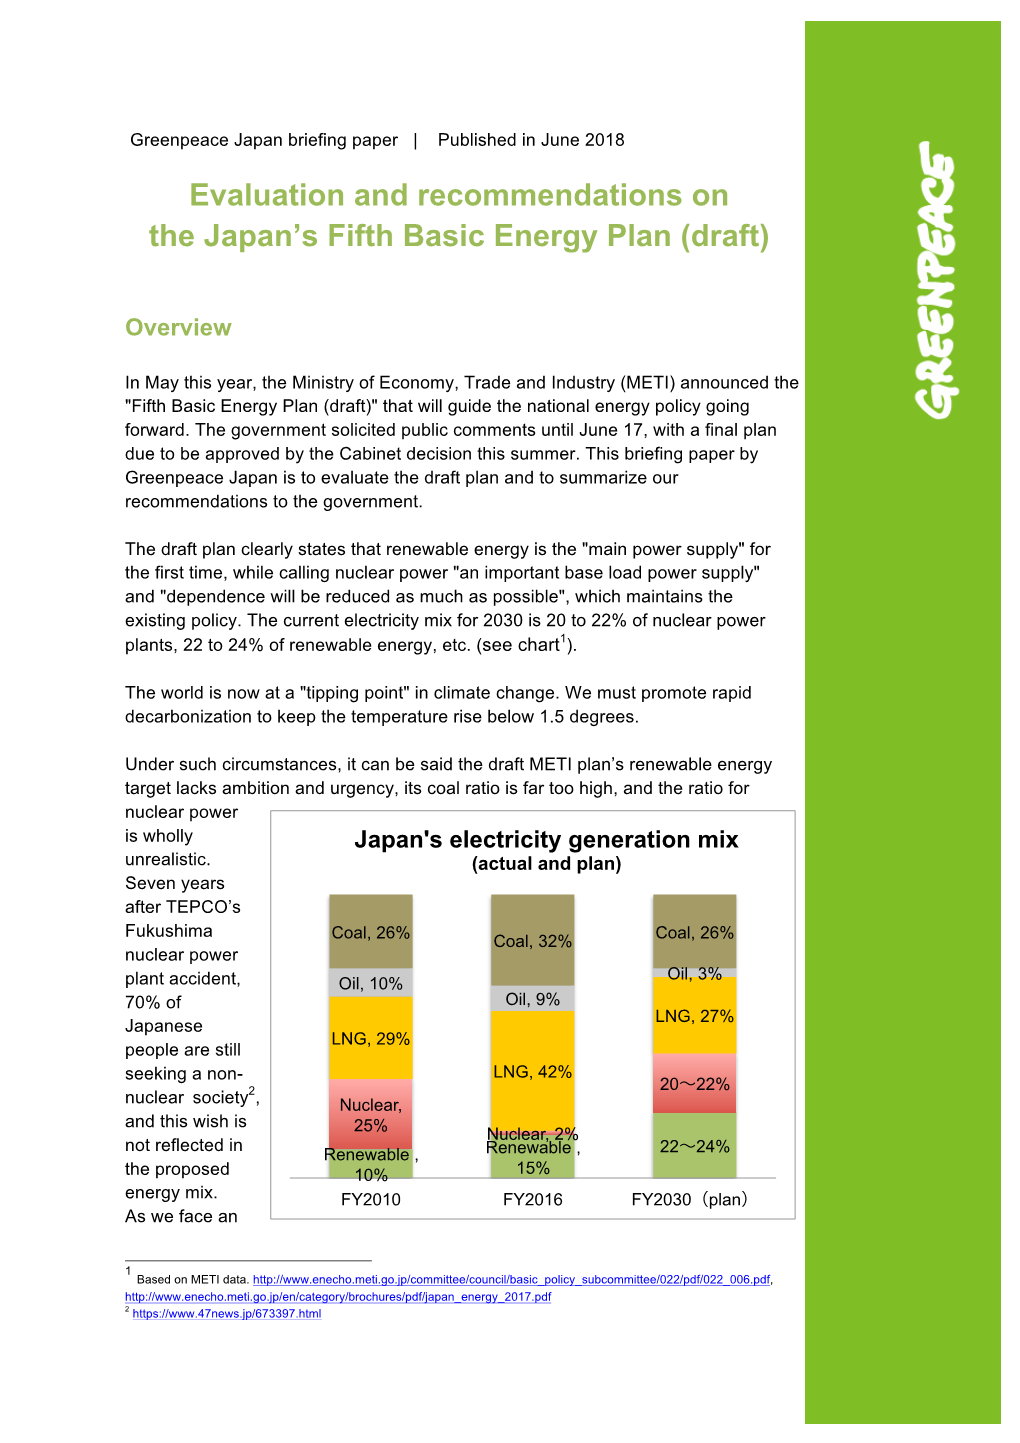 Evaluation and Recommendations on the Japan's Fifth Basic Energy Plan